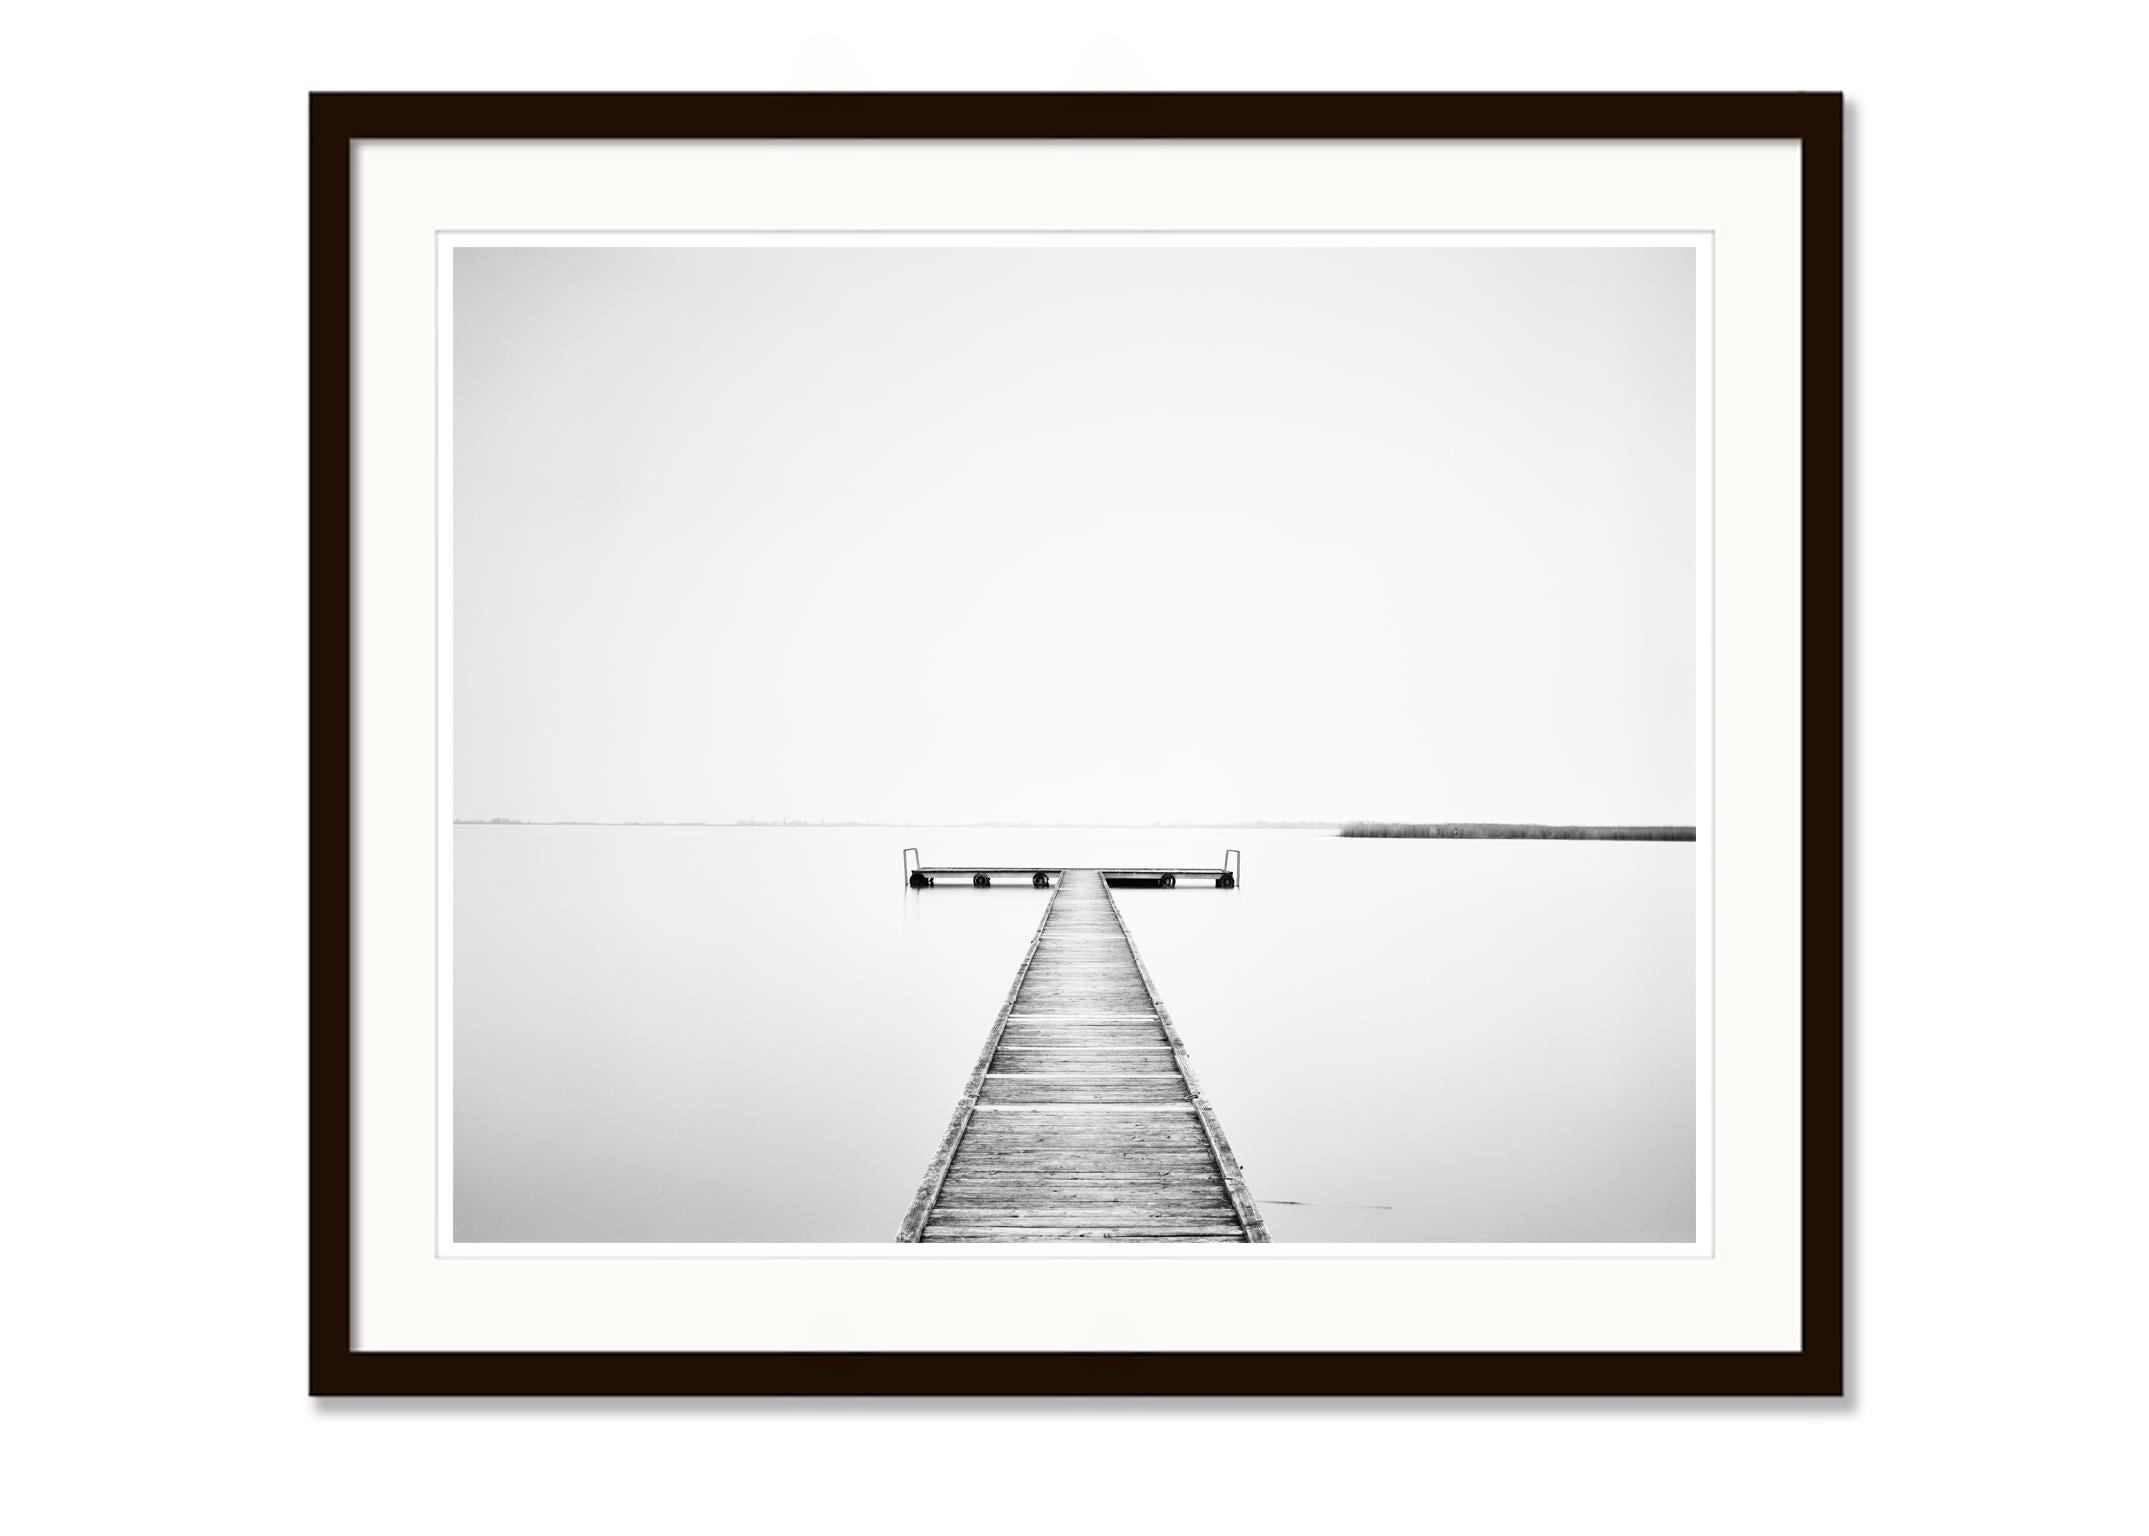 Wood Pier, Austria, contemporary black and white fine art photography landscape - Contemporary Photograph by Gerald Berghammer, Ina Forstinger